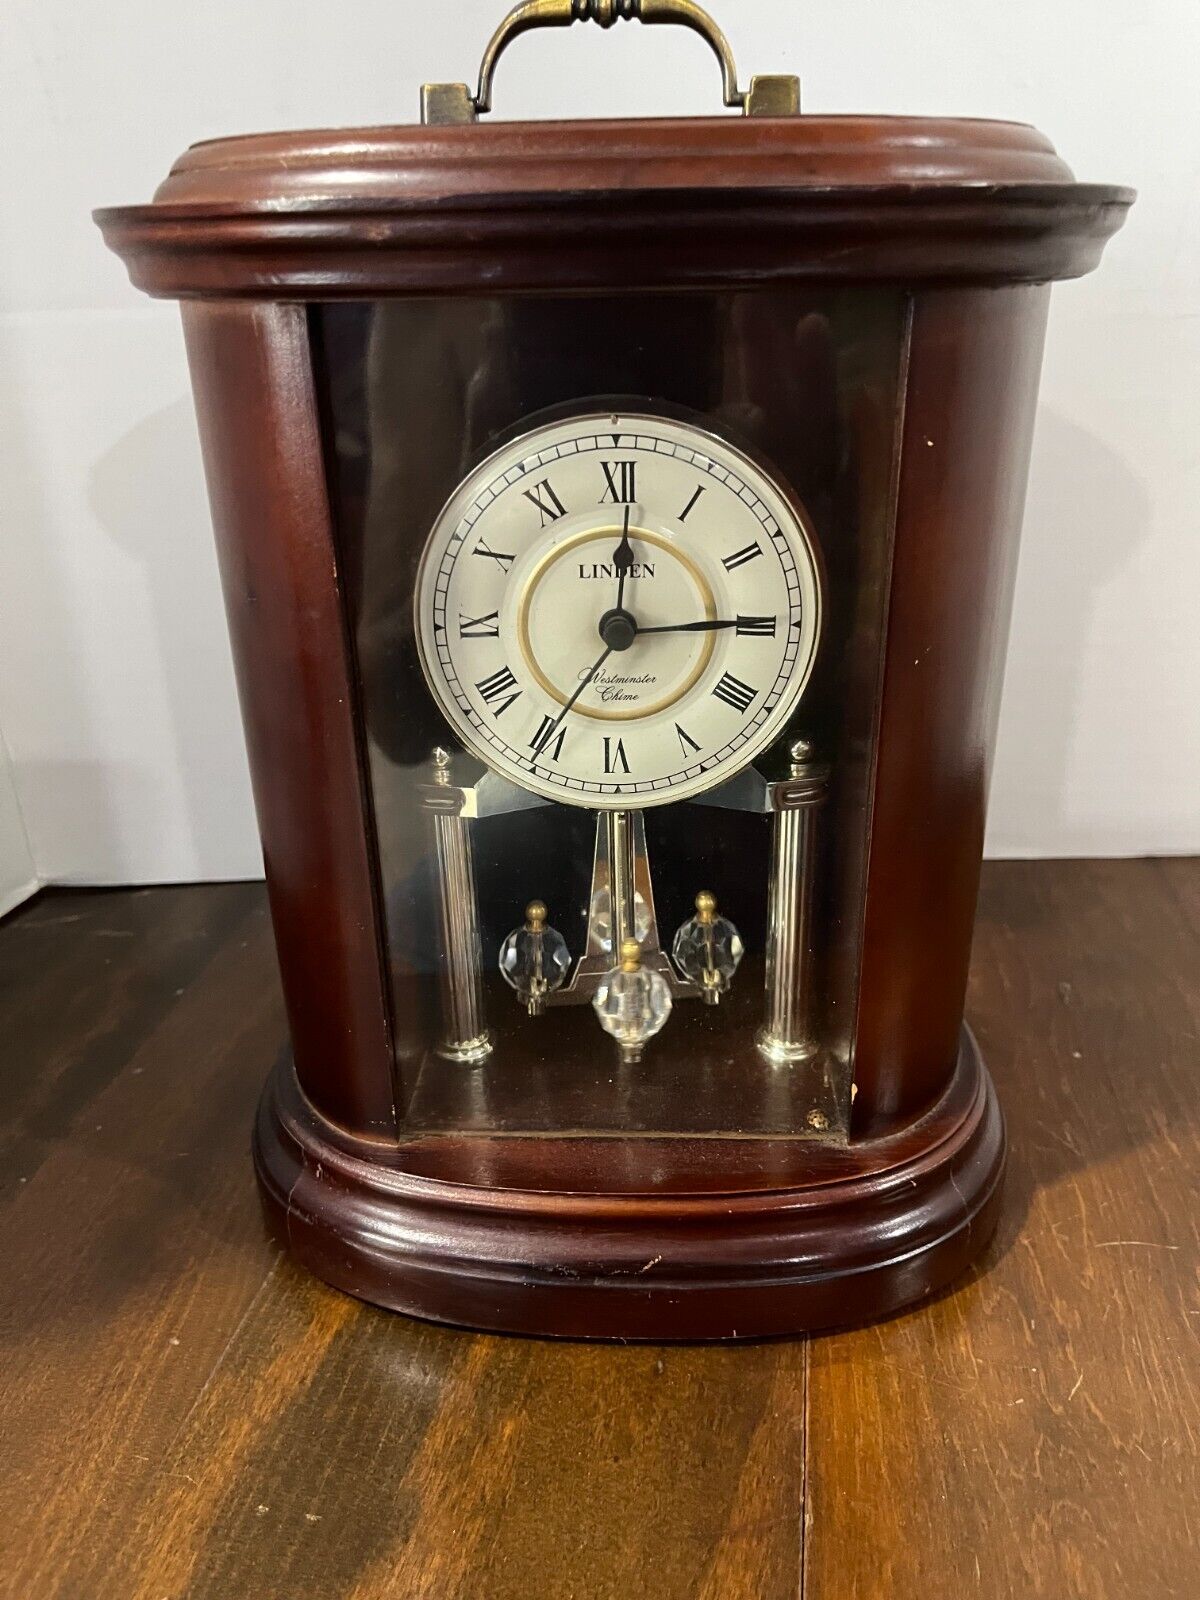 Wooden Linden Clock with Chime